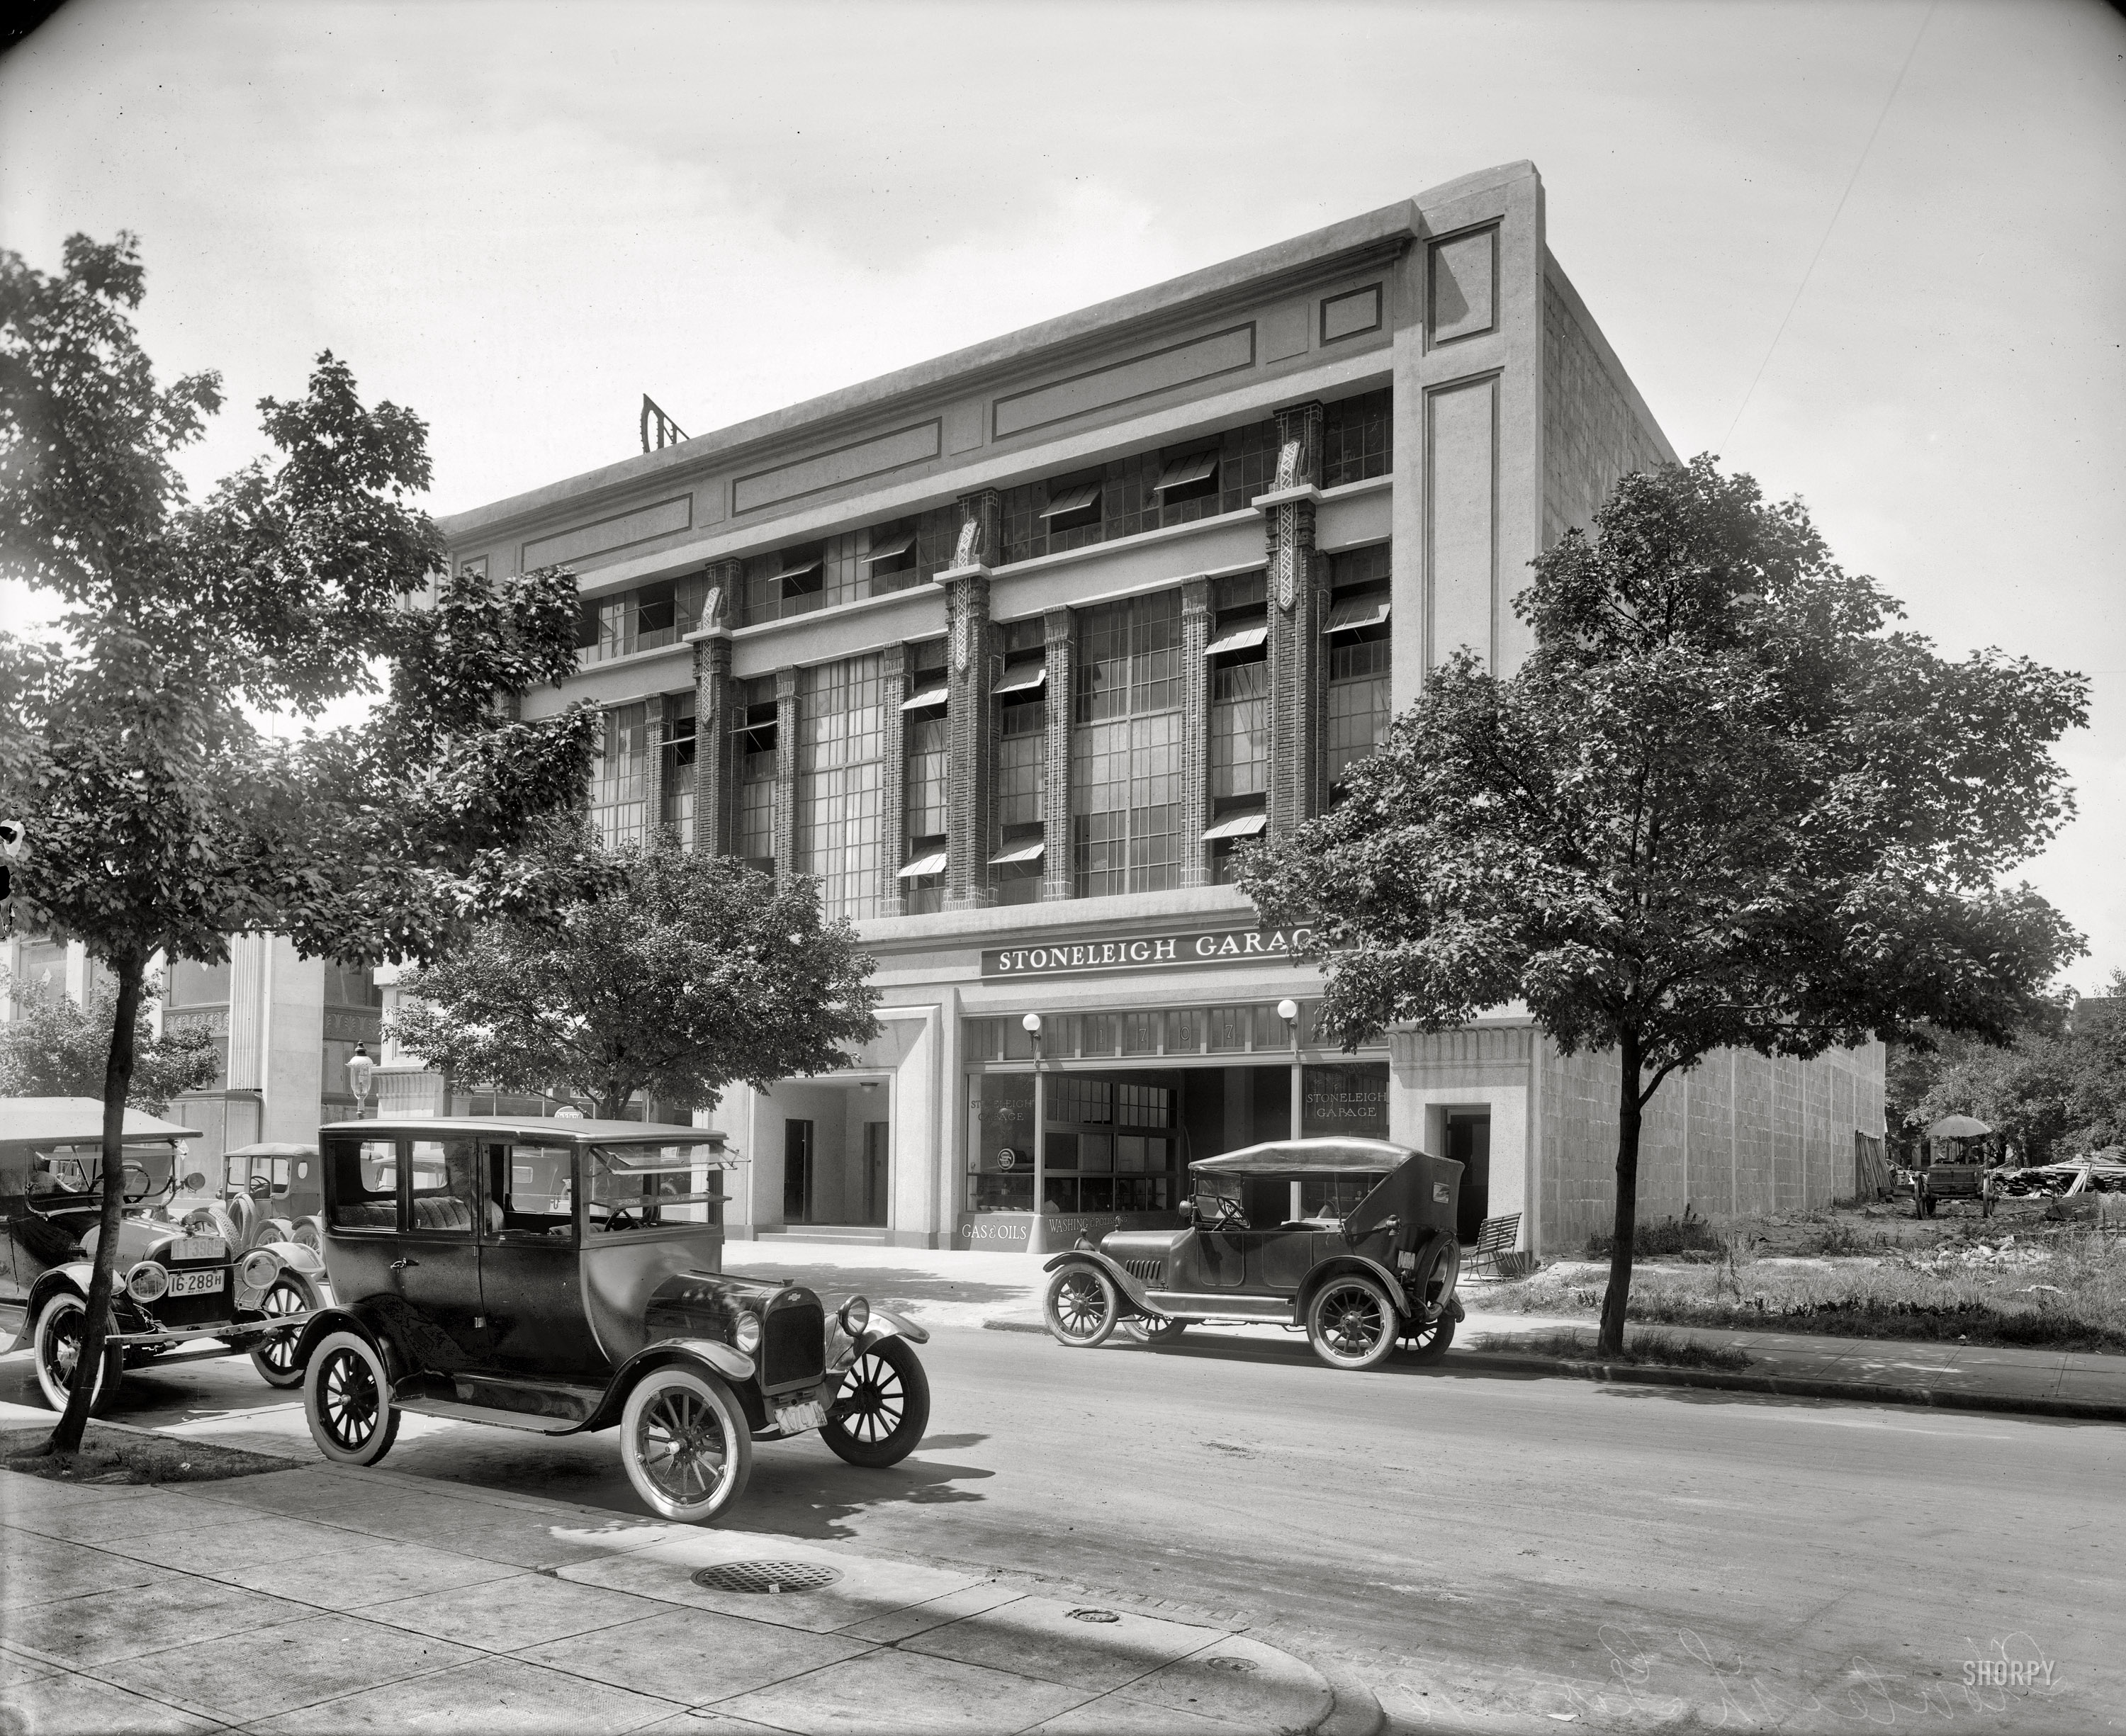 Washington, D.C. The Stoneleigh Garage at 1707 L Street in 1921, shortly before construction of the gas station next door. National Photo Co. View full size.